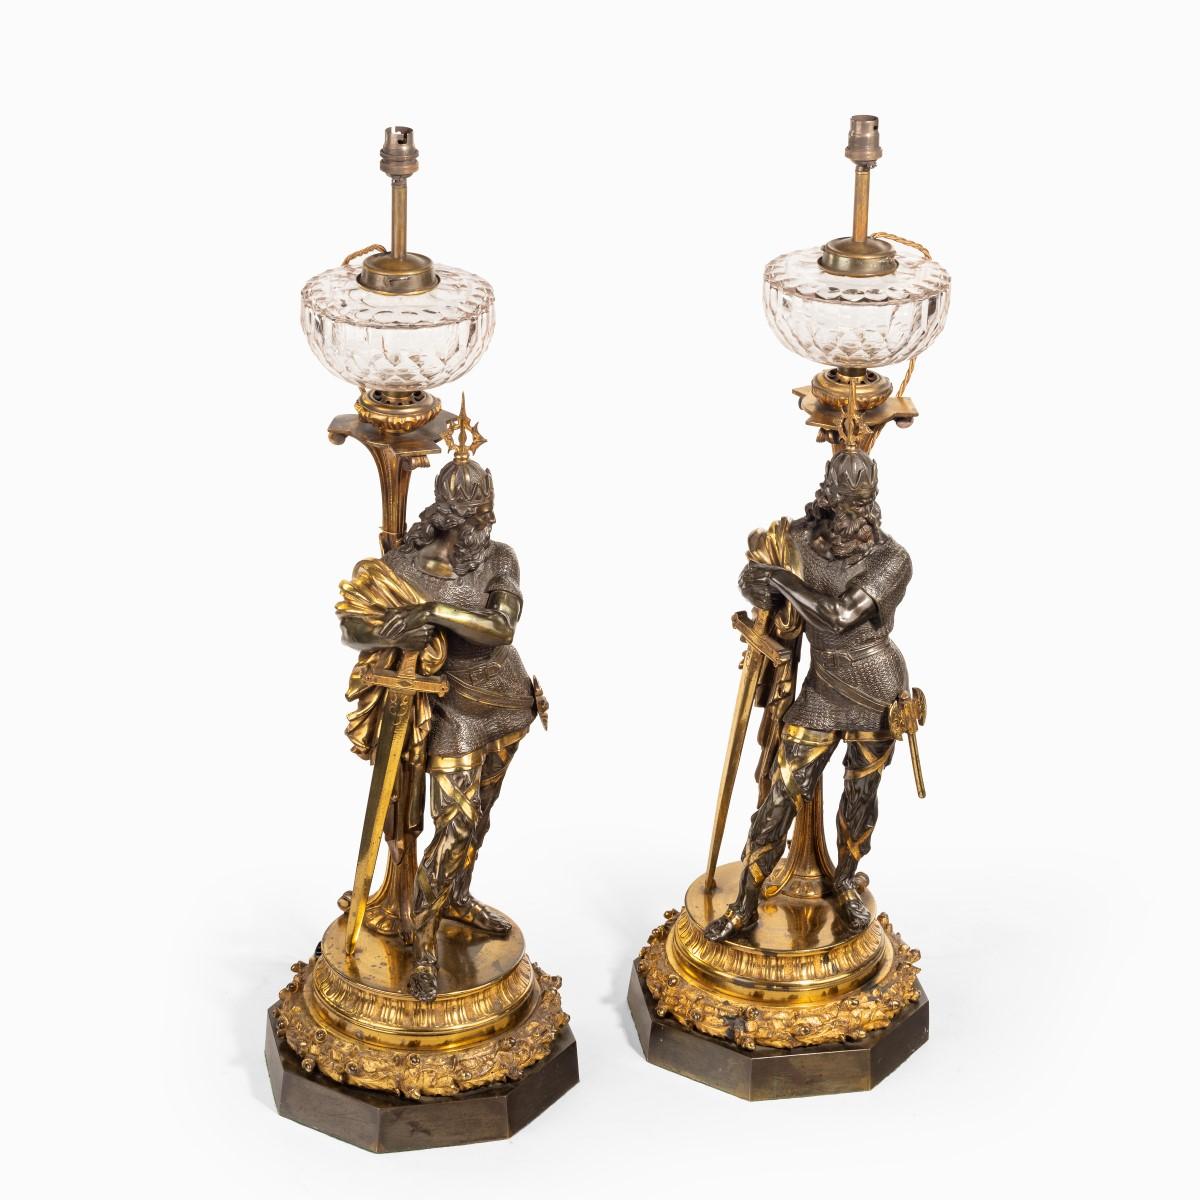 A very fine pair of mid-Victorian parcel gilt bronze oil lamps, by Hinks